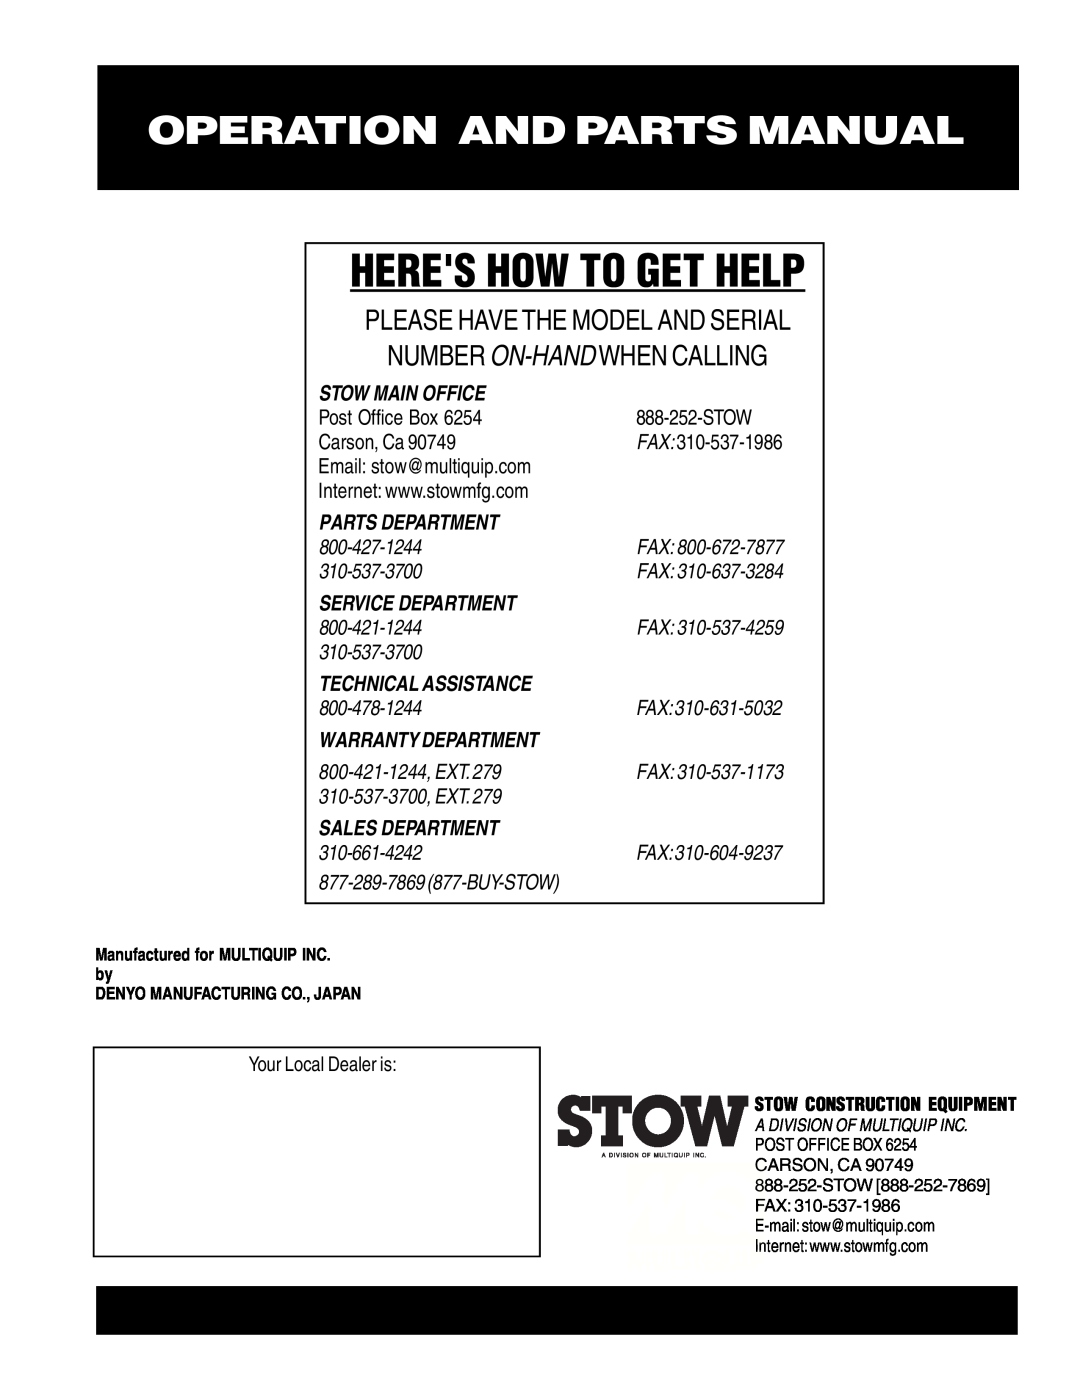 Stow G-2.9R Heres How To Get Help, Operation And Parts Manual, Stow Main Office, Parts Department, Service Department 